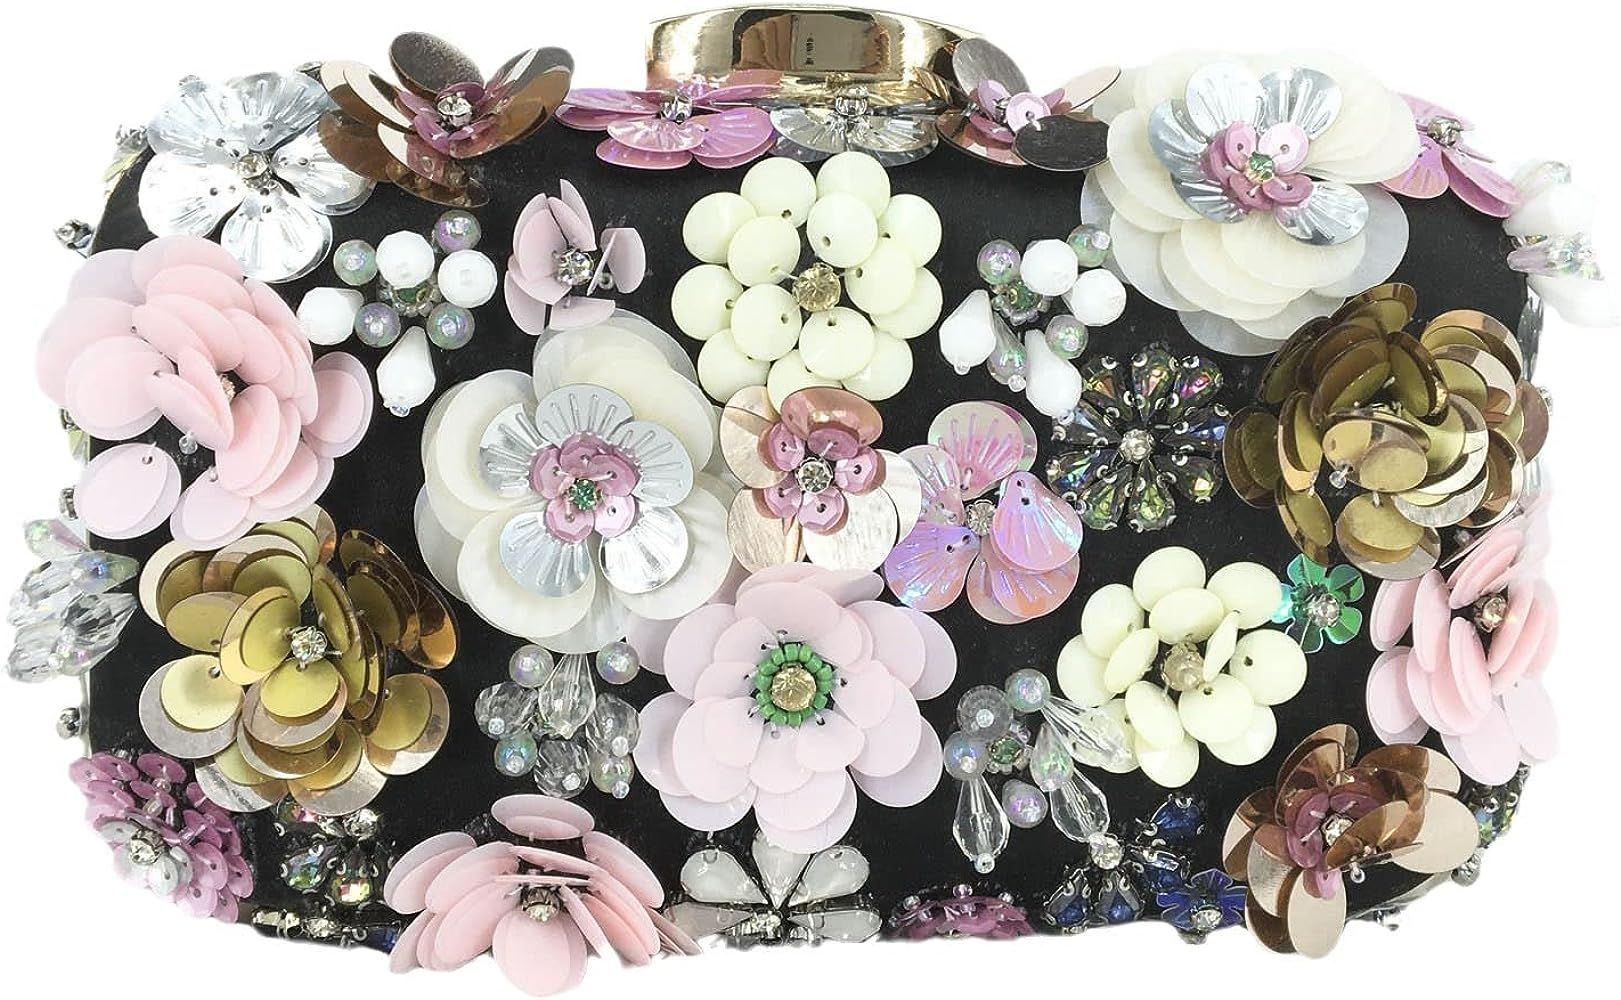 Vintage Women Flower Clutch Purse Evening Bags and Clutches Bridal Wedding Party Handbags | Amazon (US)